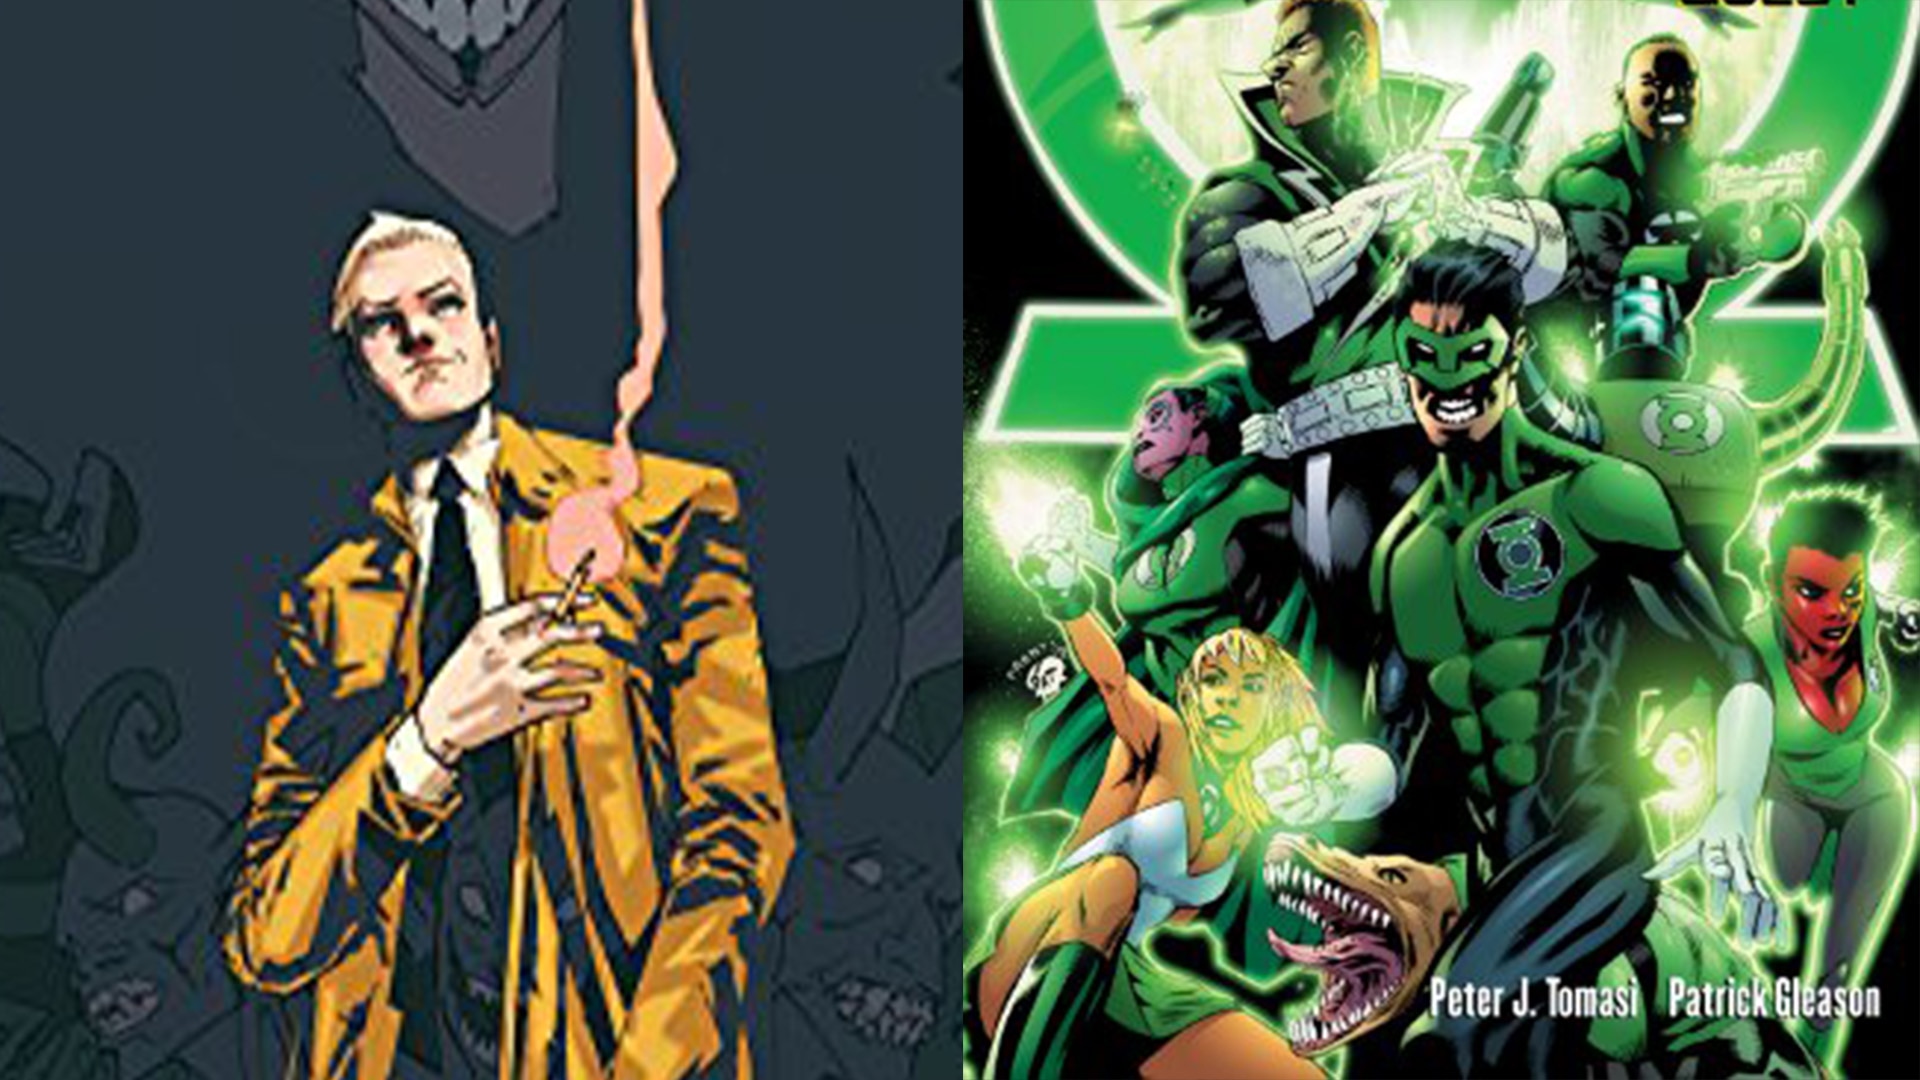 Constantine: The Hellblazer Vol. 2: The Art of the Deal; Green Lantern Corps: Ring Quest